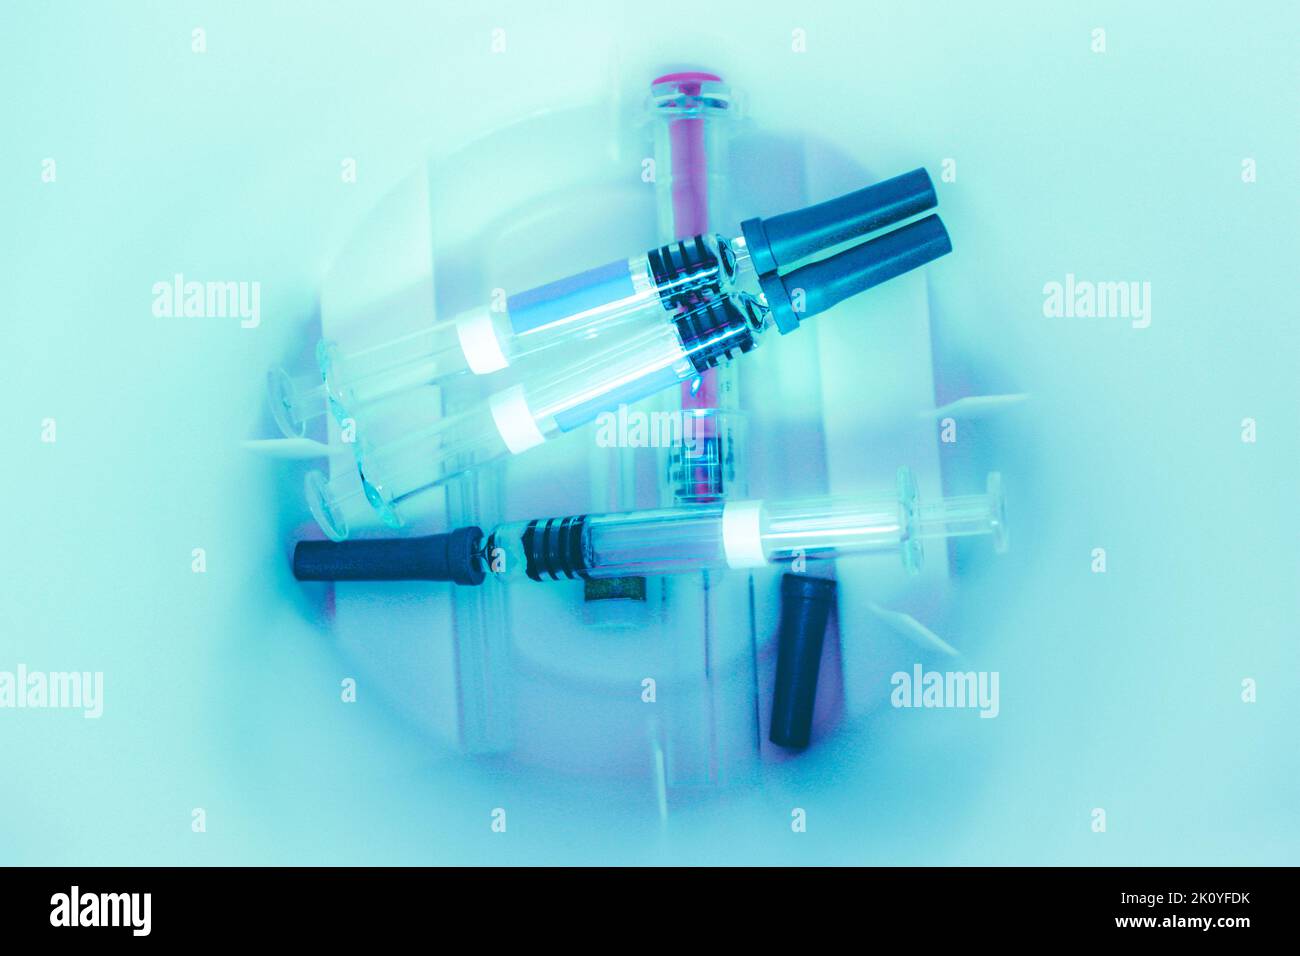 Syringes inside a Sharps Collector Stock Photo